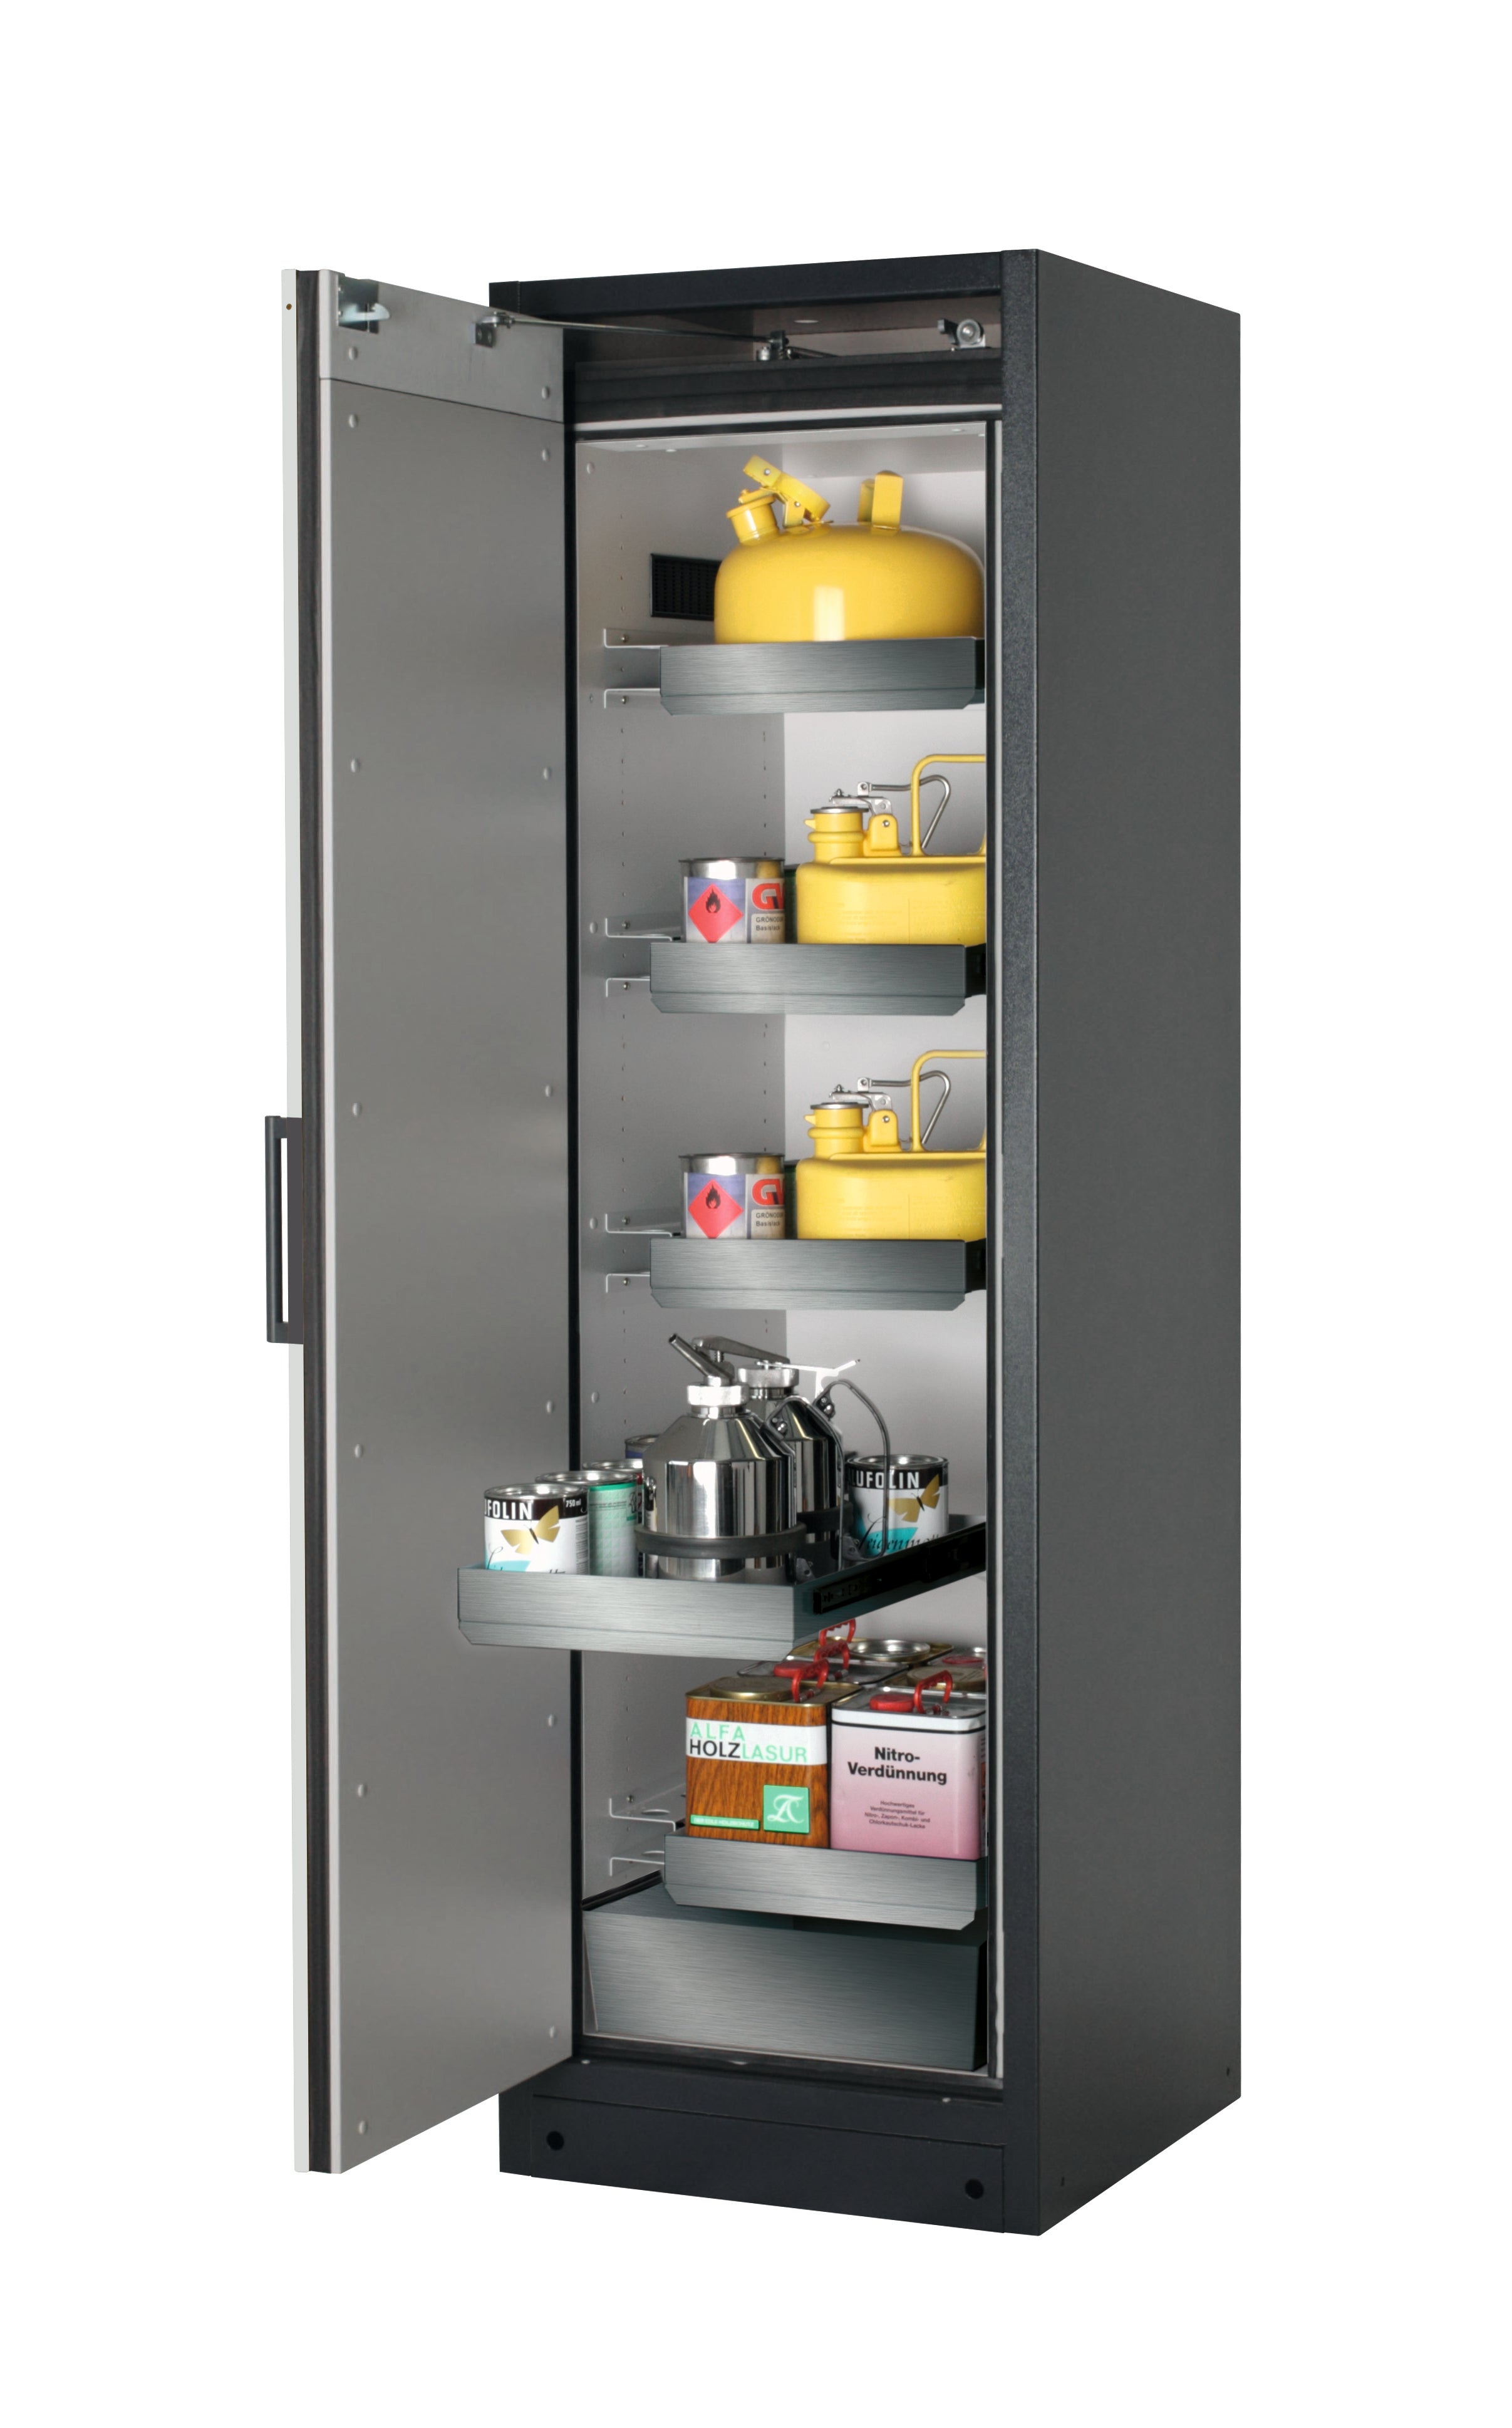 Type 90 safety storage cabinet Q-CLASSIC-90 model Q90.195.060 in light grey RAL 7035 with 4x drawer (standard) (stainless steel 1.4301),